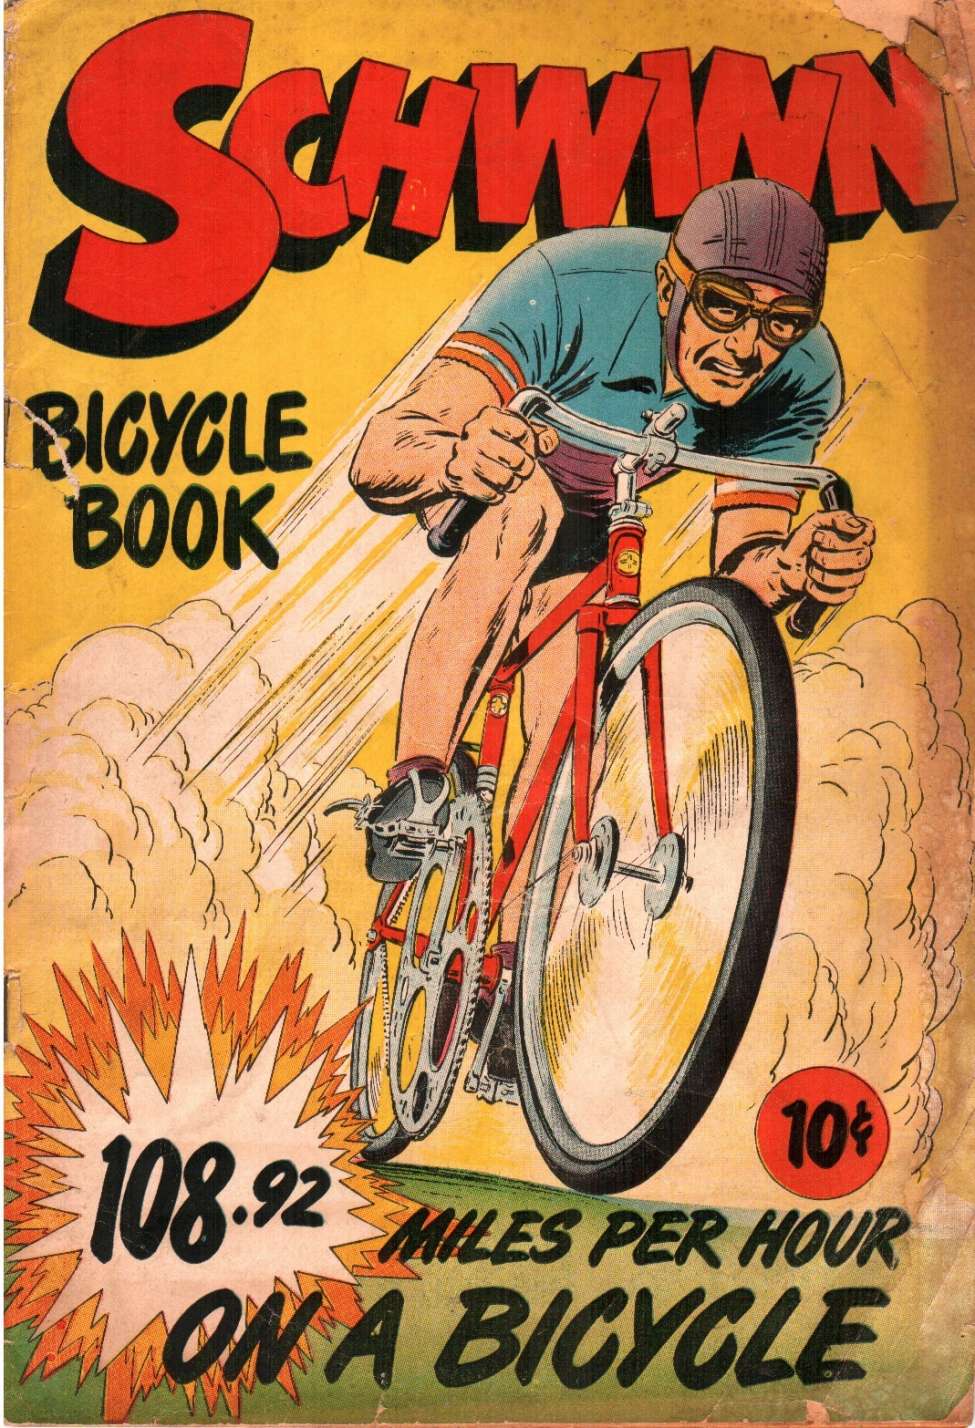 Comic Book Cover For Schwinn Bicycle Book